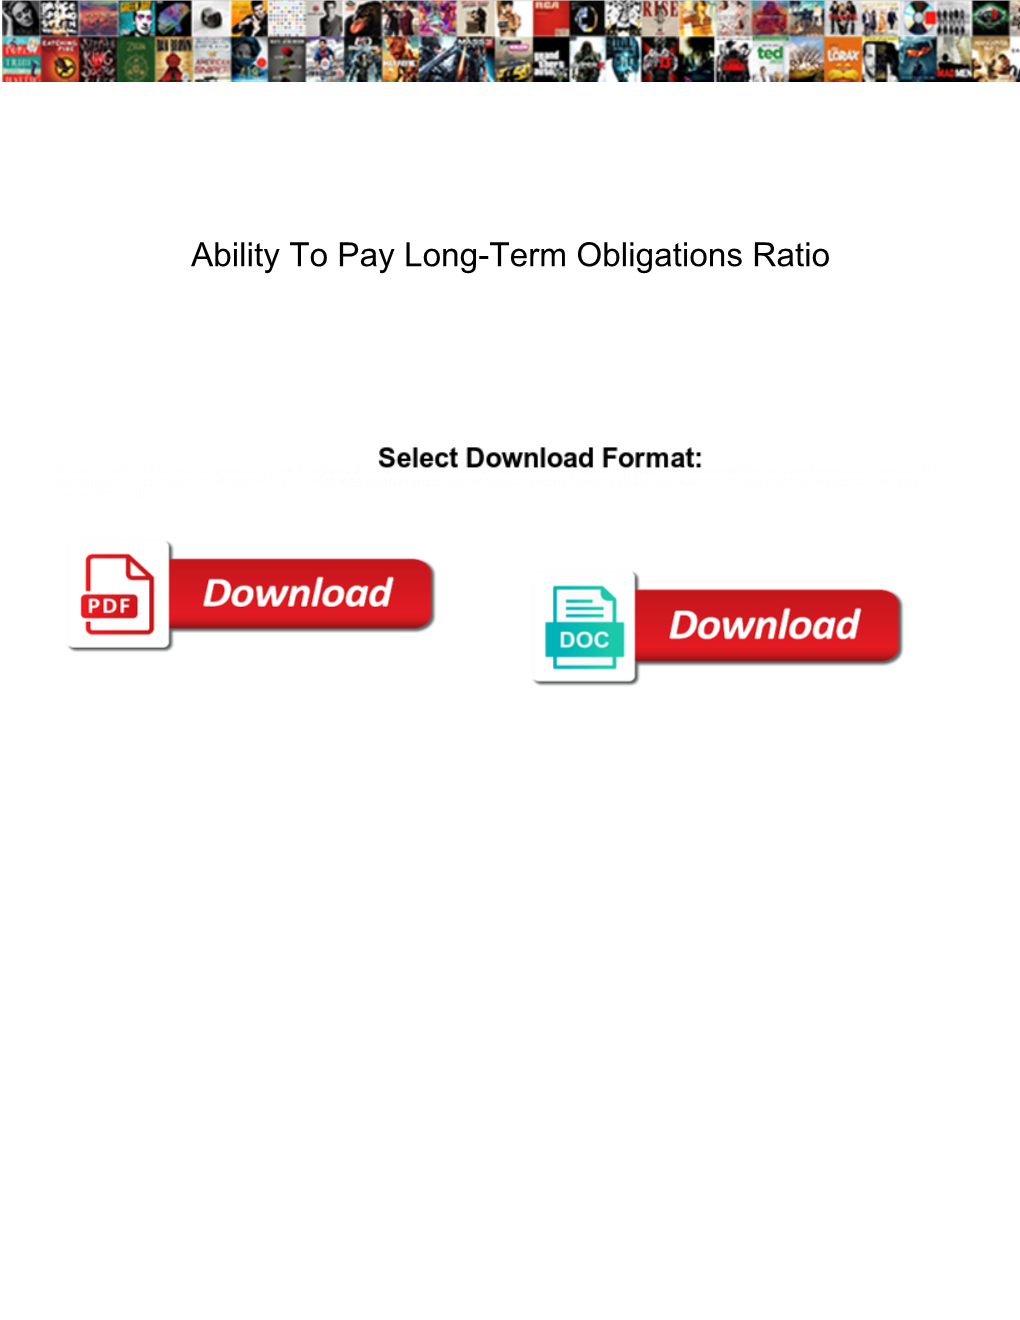 Ability to Pay Long-Term Obligations Ratio